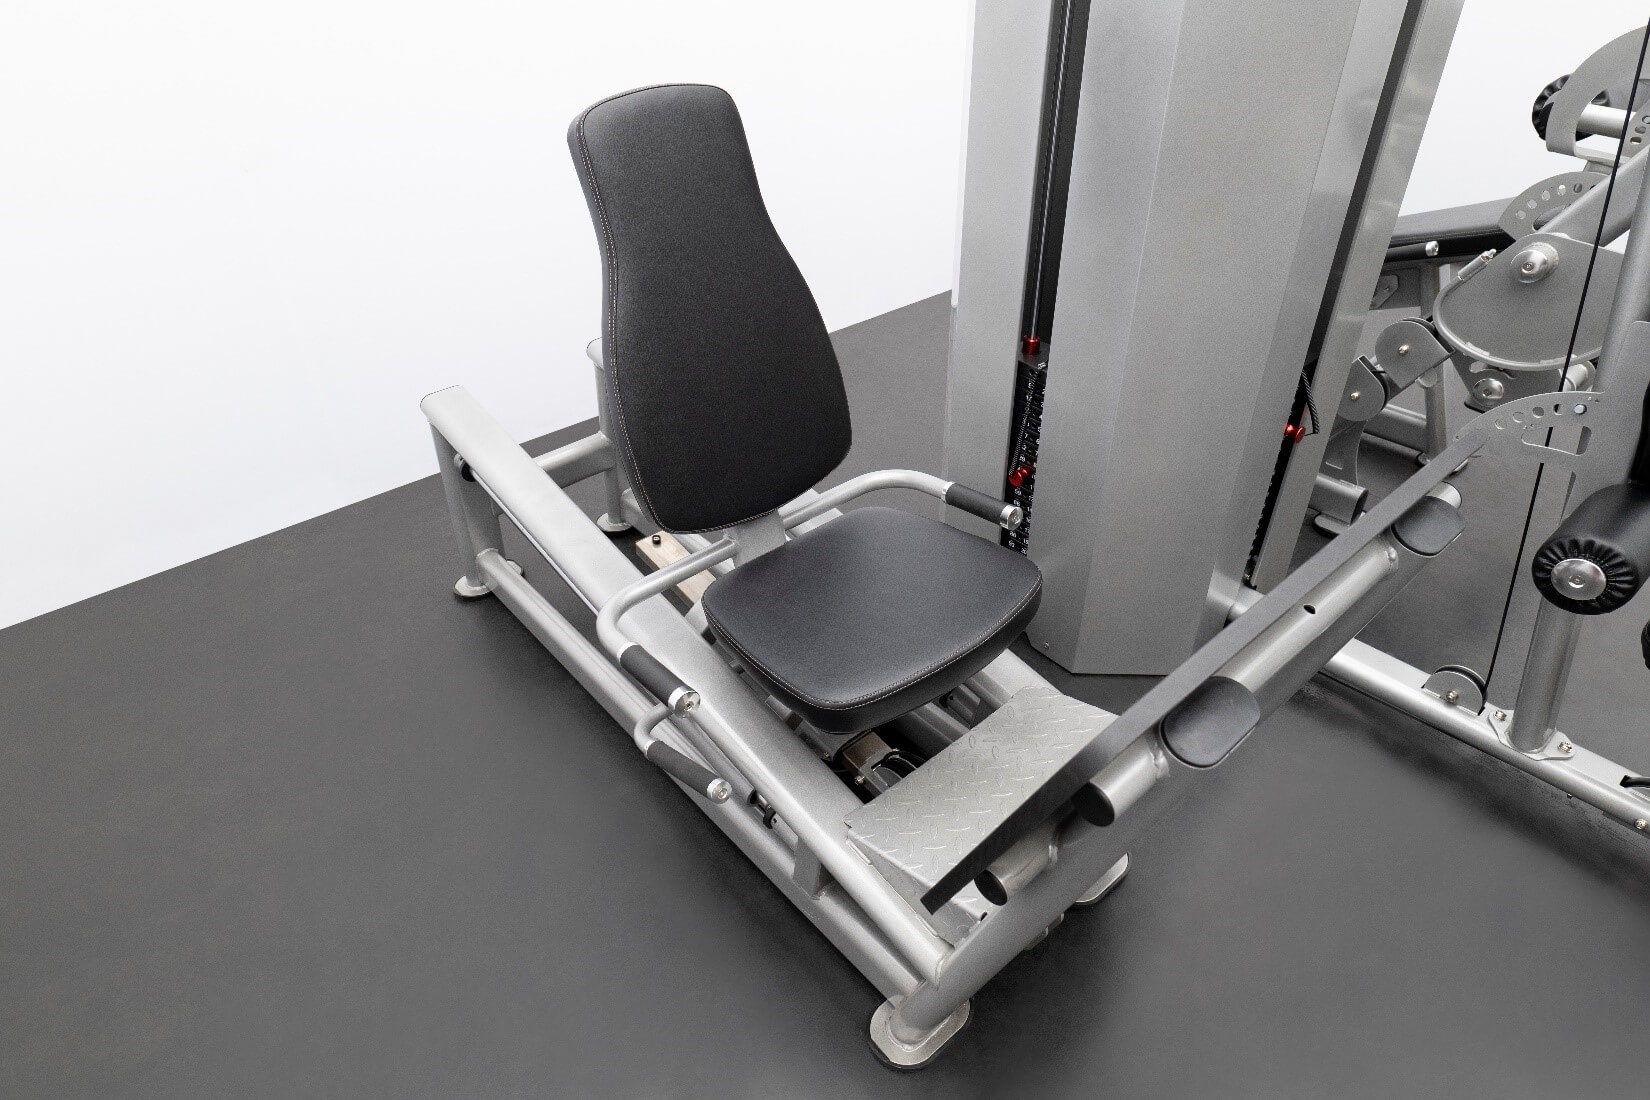 Seated leg press is on linear bearings for safety and comfortability